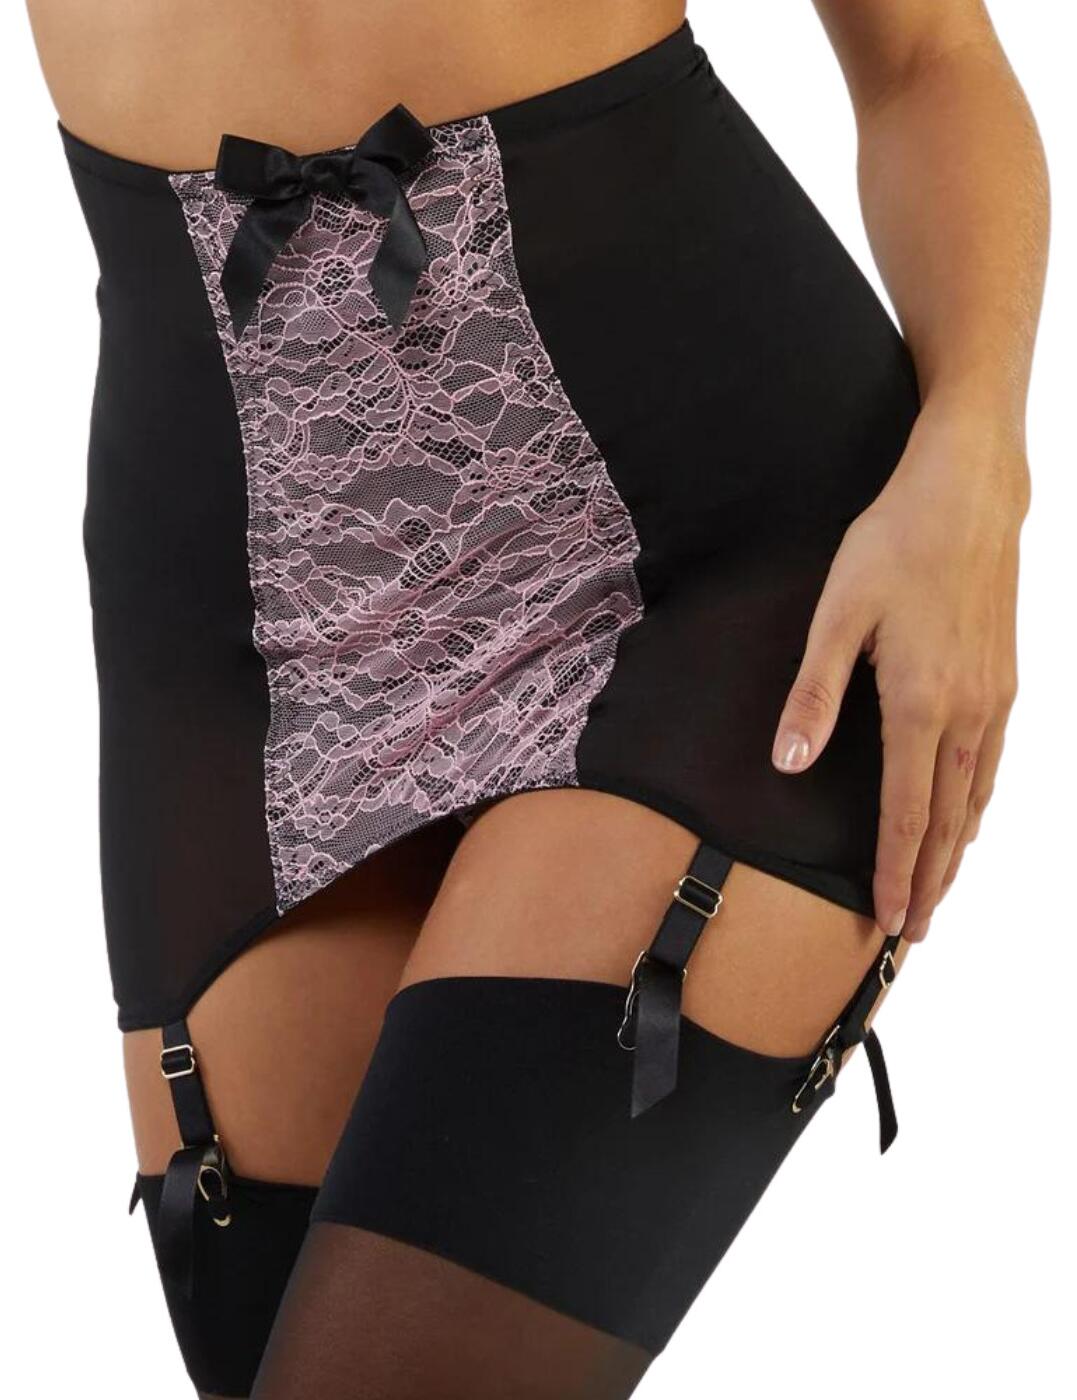 BPSB077P Bettie Page Elsie Lace Girdle - BPSB077P Pink